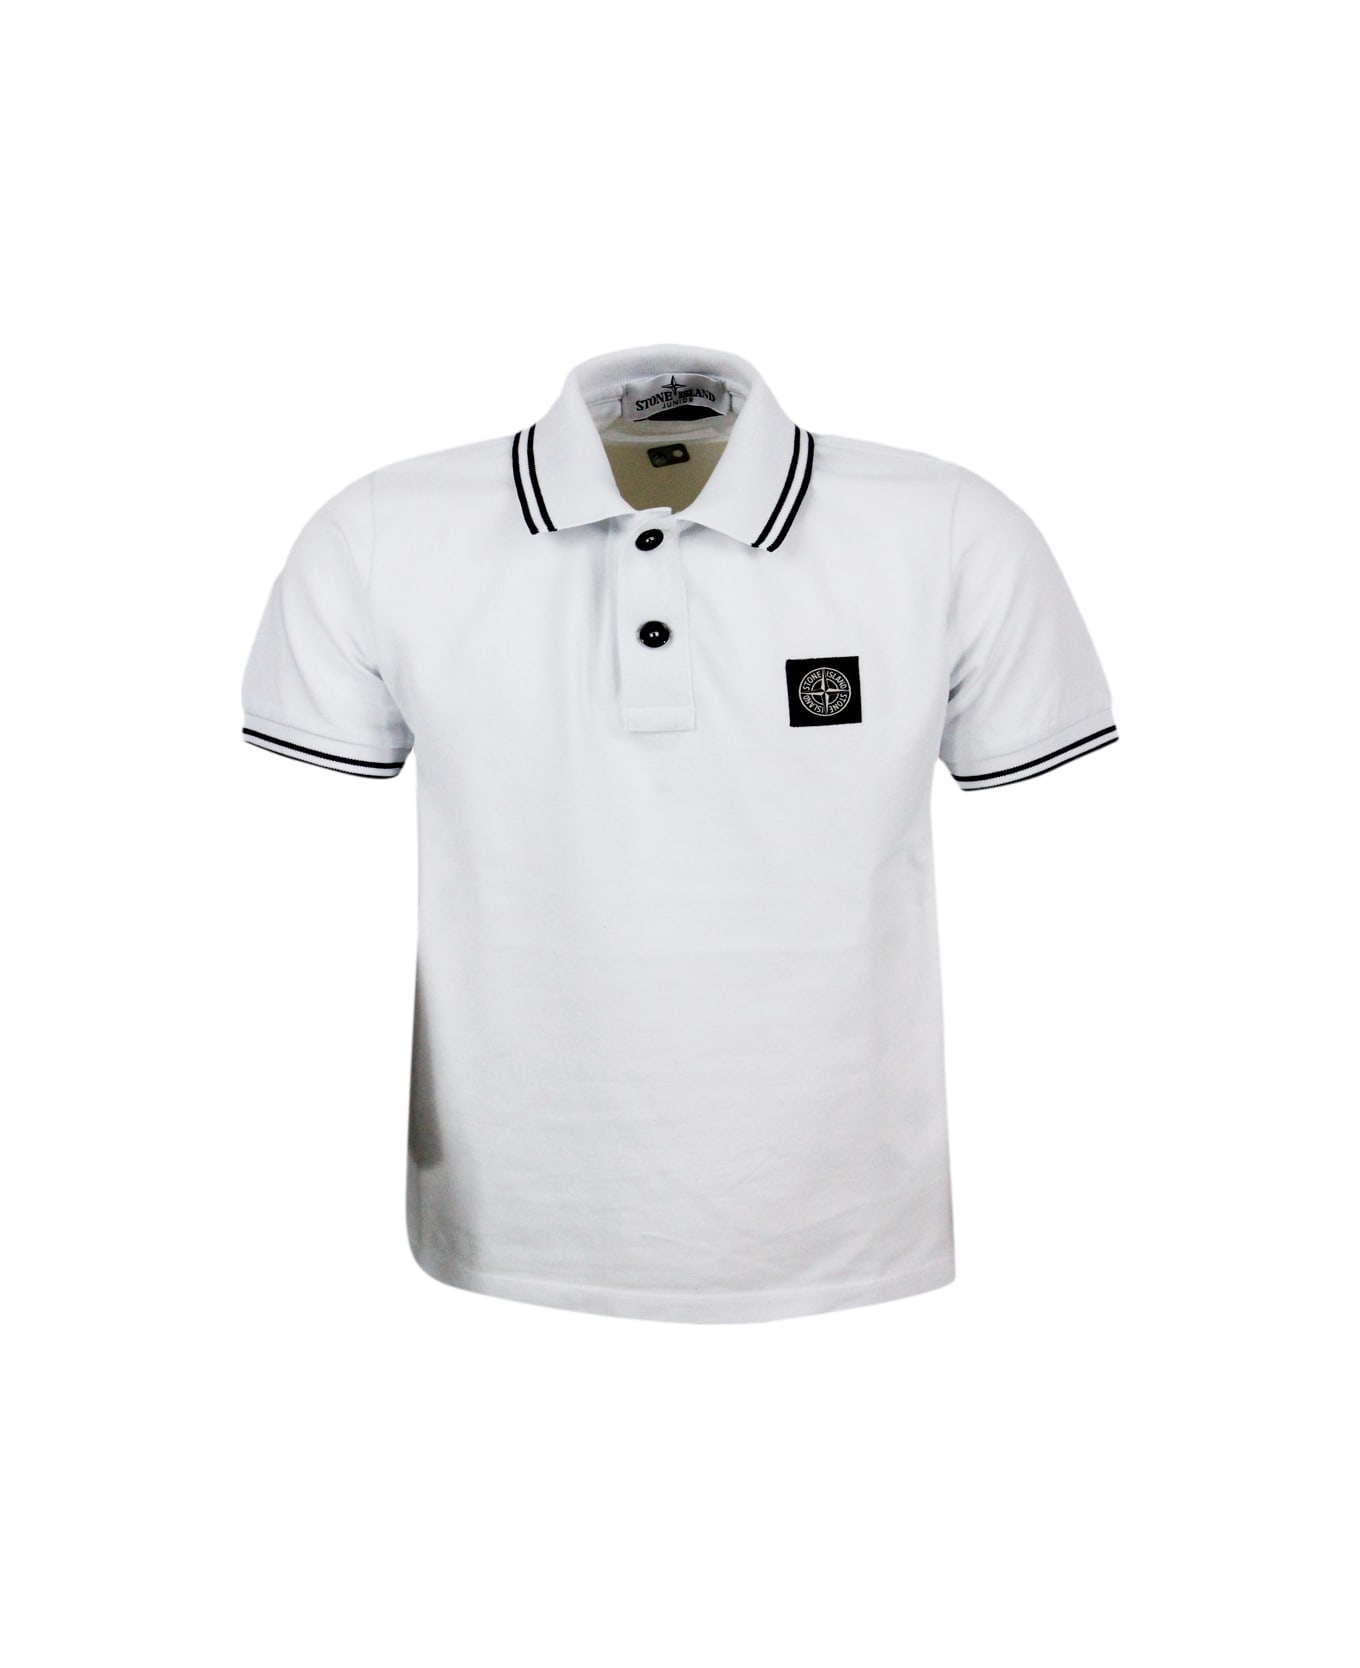 Stone Island Short-sleeved Pique Cotton Polo Shirt With Contrasting Color Profiles On The Collar And Sleeve. Logo On The Chest - White Tシャツ＆ポロシャツ